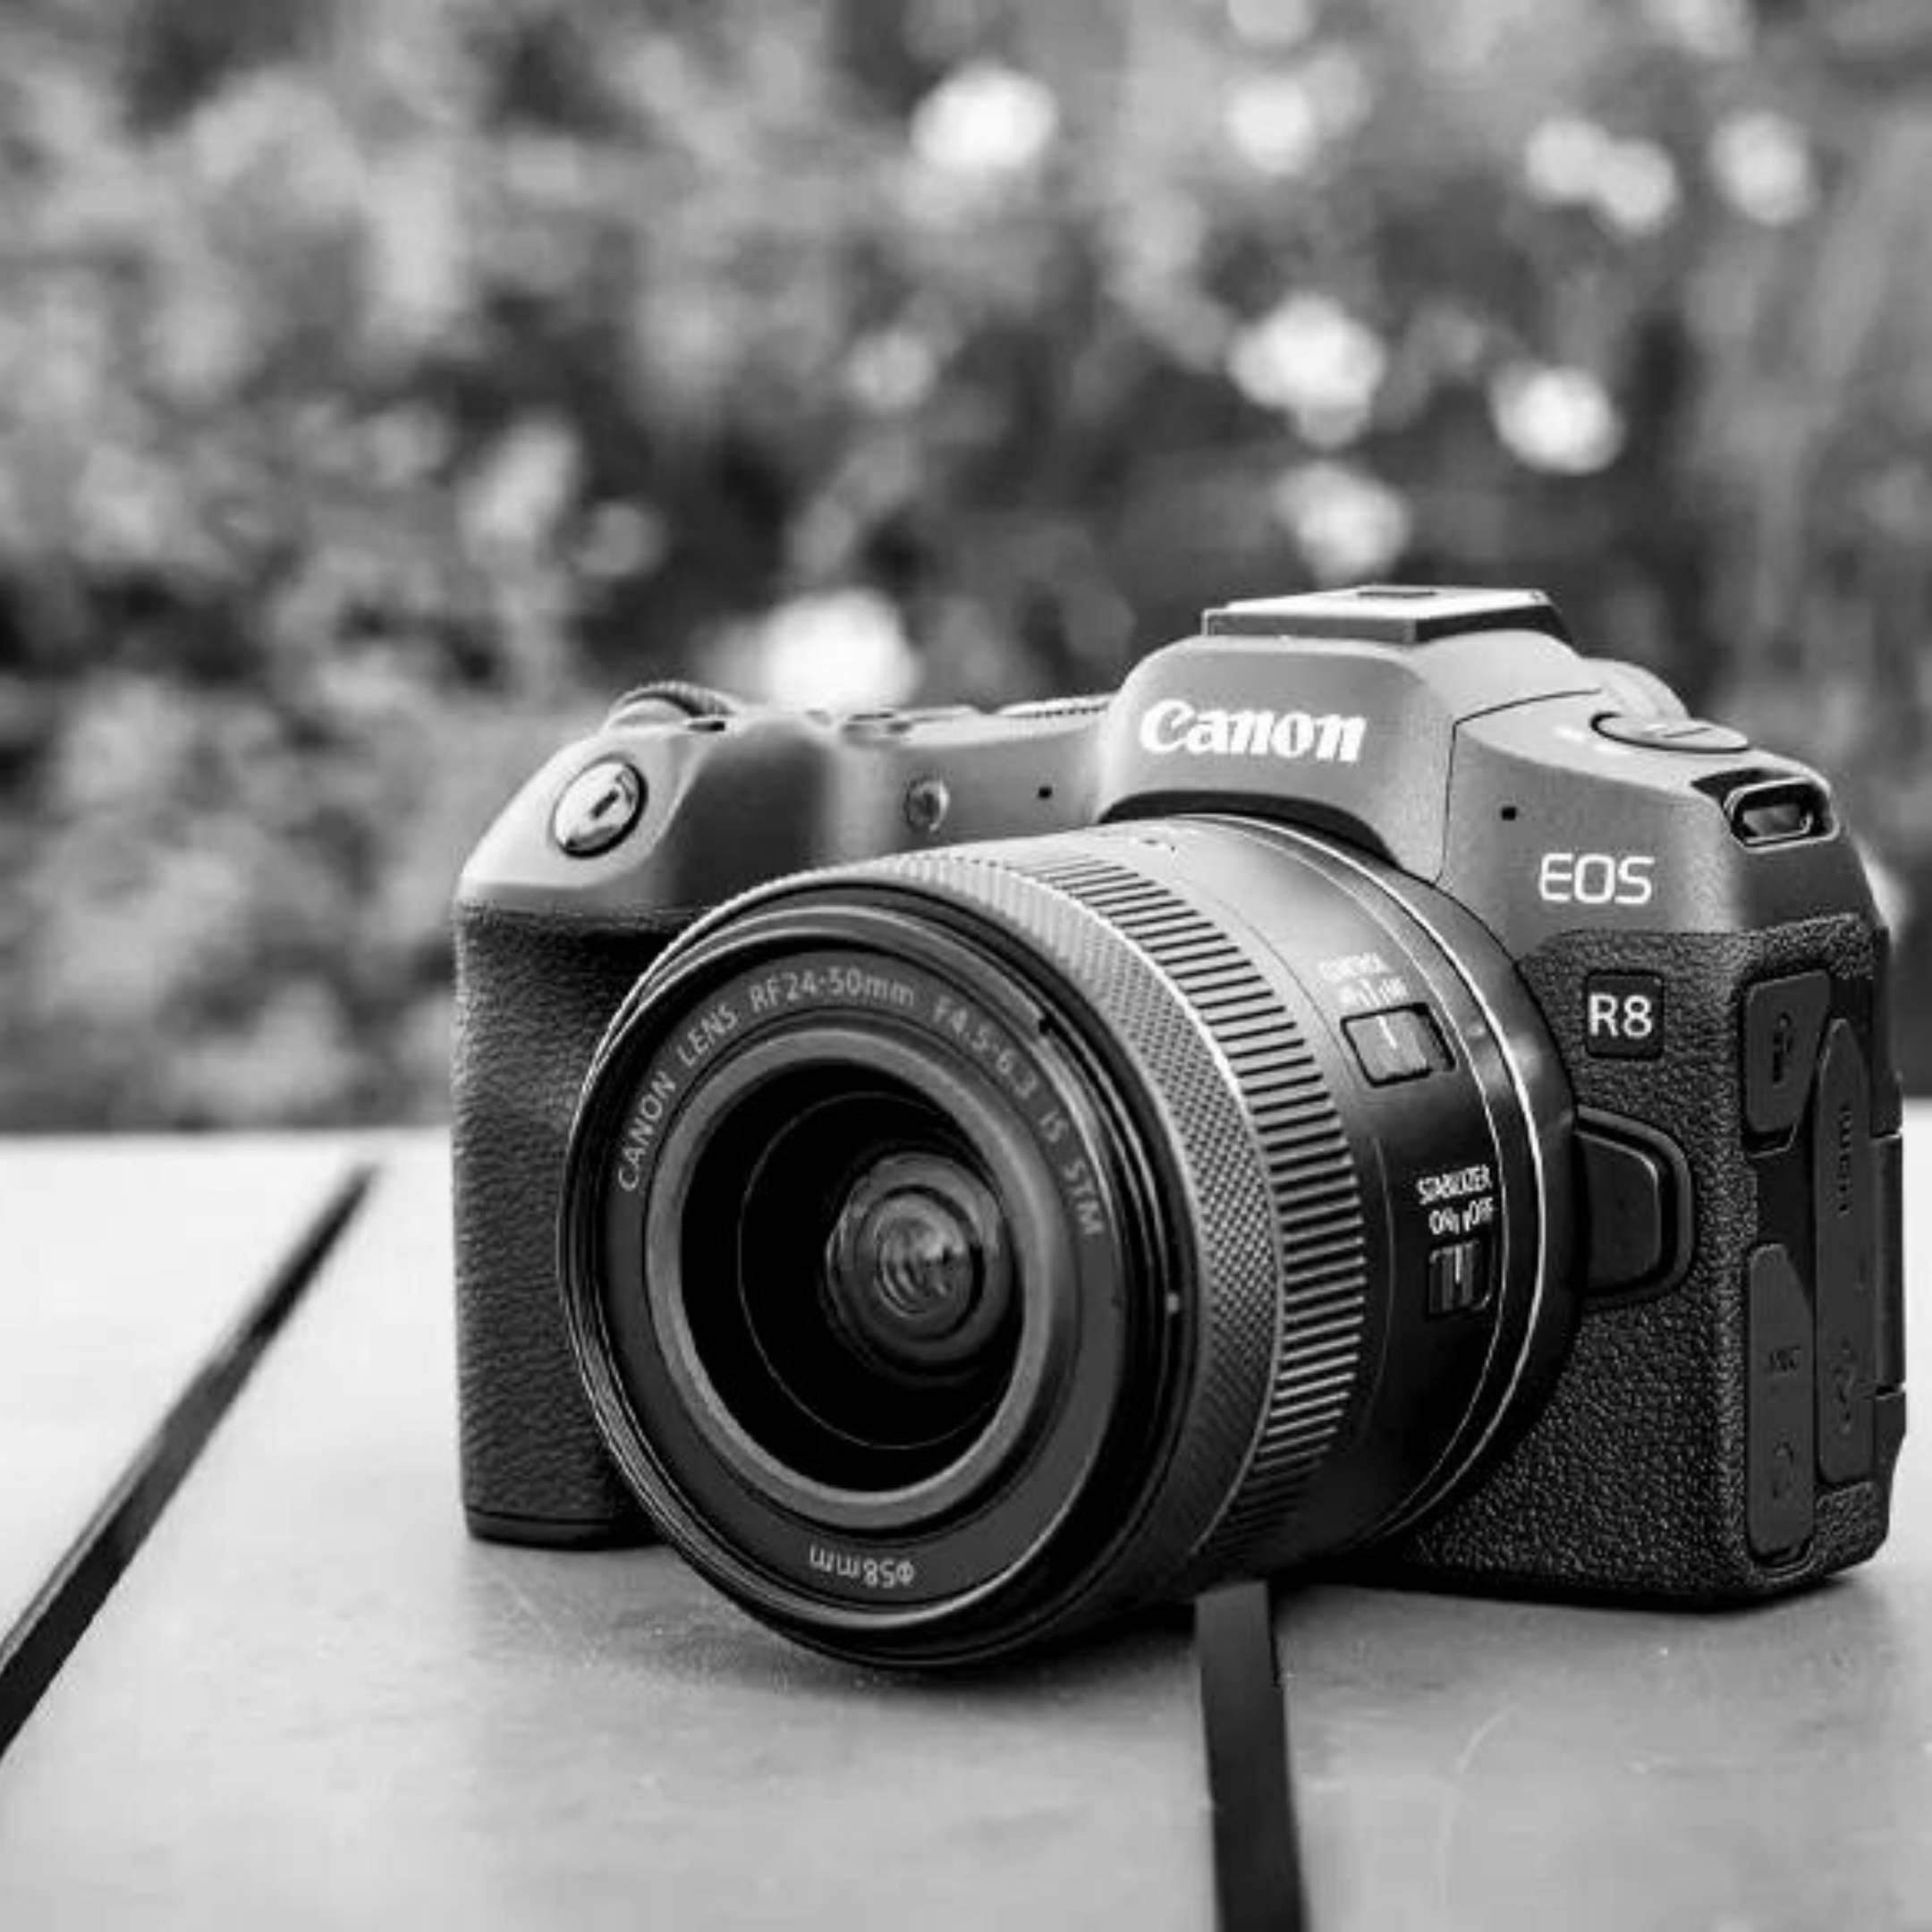 Cannon EOS R8 : A Leap in Image Quality and Versatility